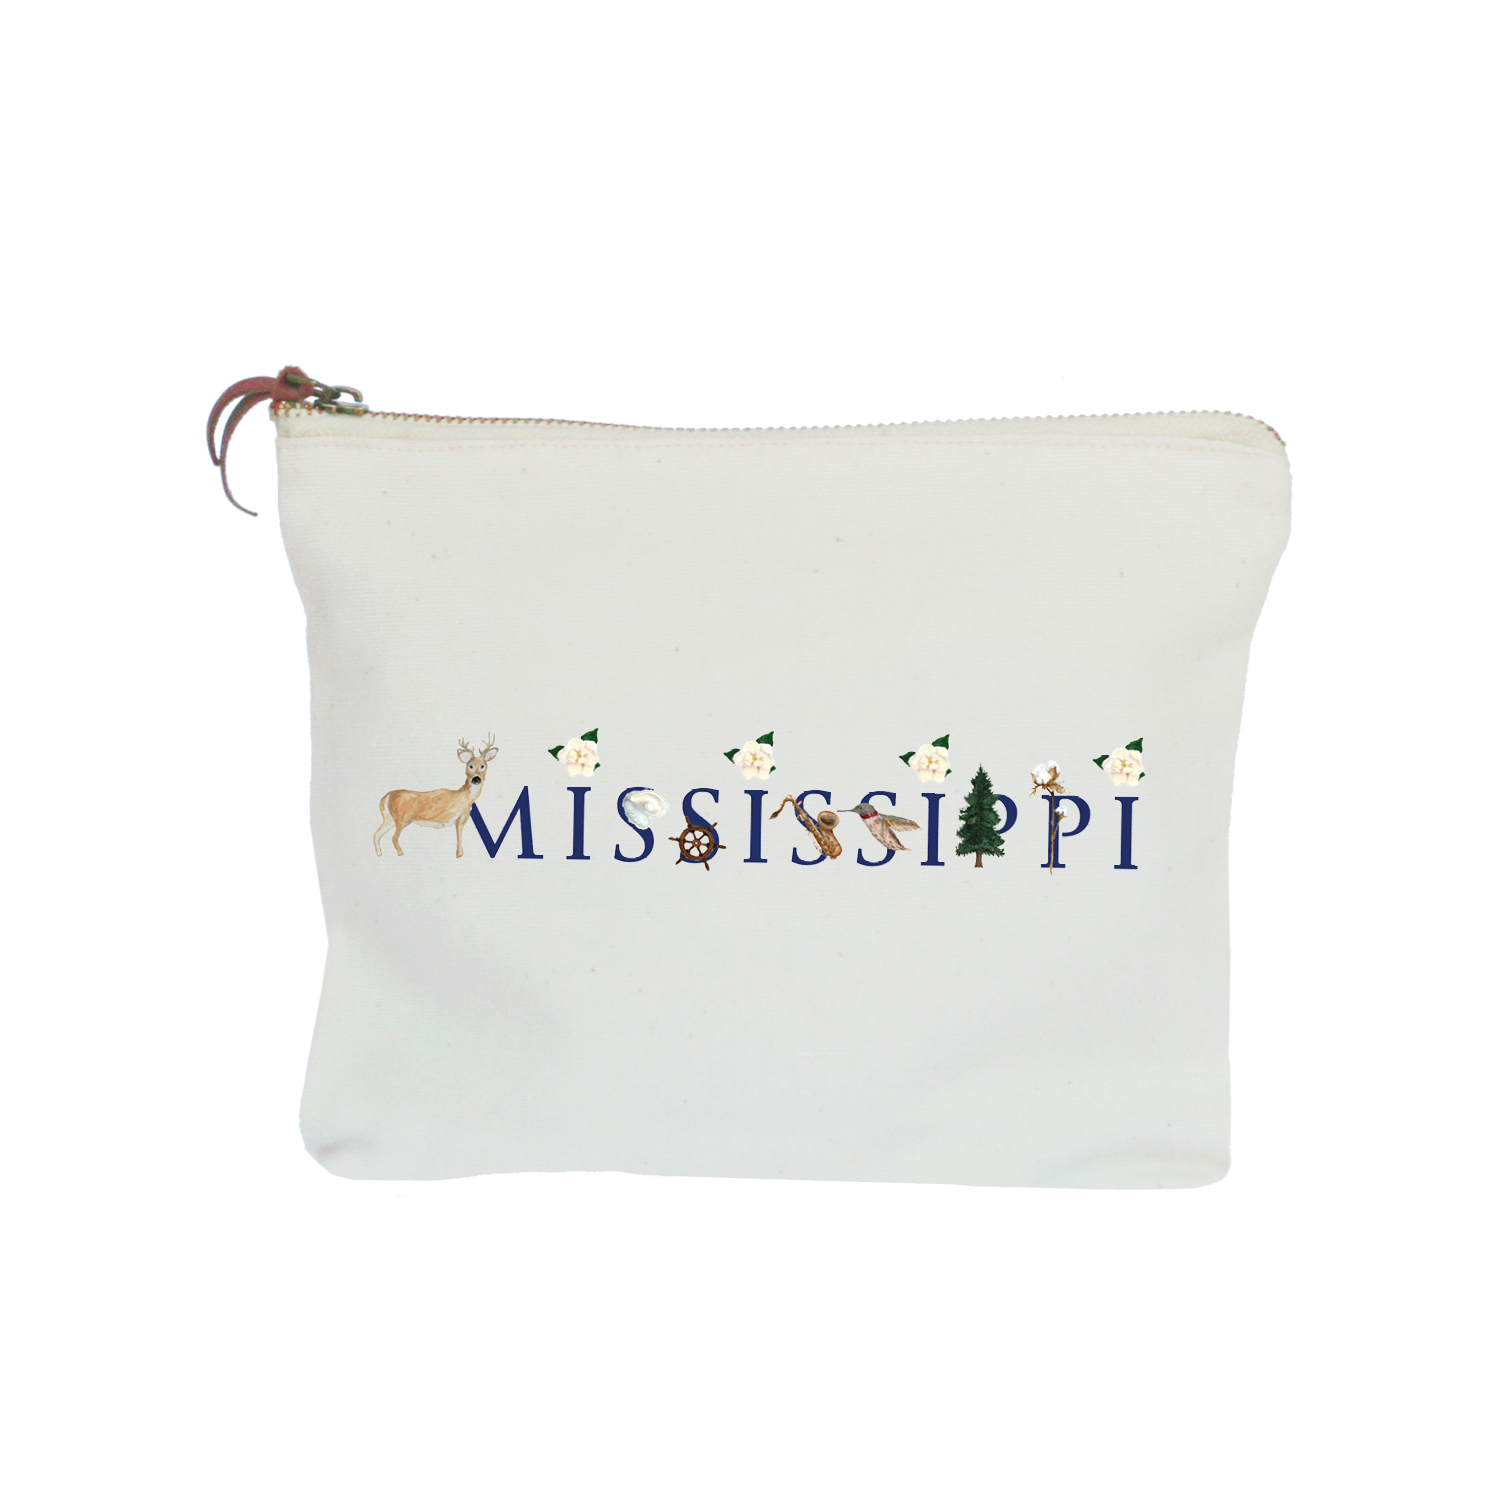 Mississippi zipper pouch